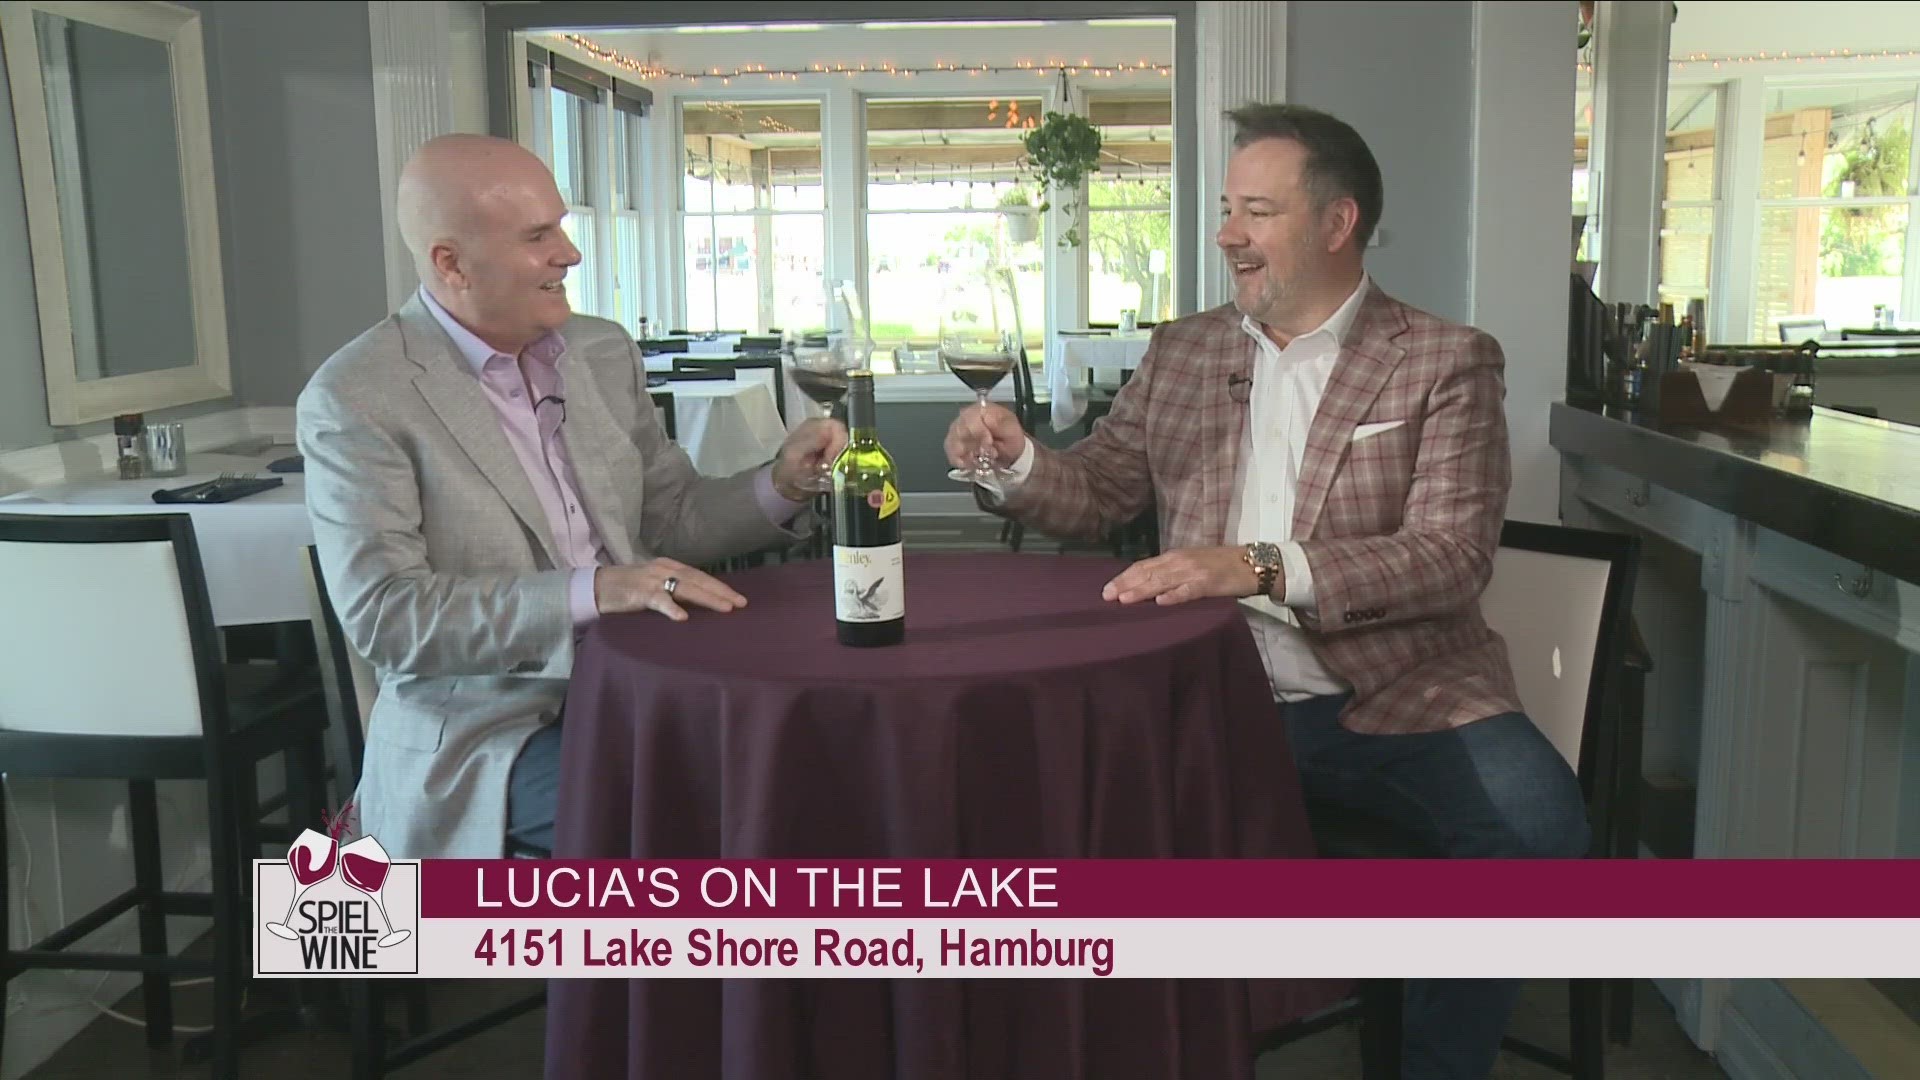 Spiel the Wine -- May 27 -- Segment 3 THIS VIDEO IS SPONSORED BY LUCIA'S ON THE LAKE